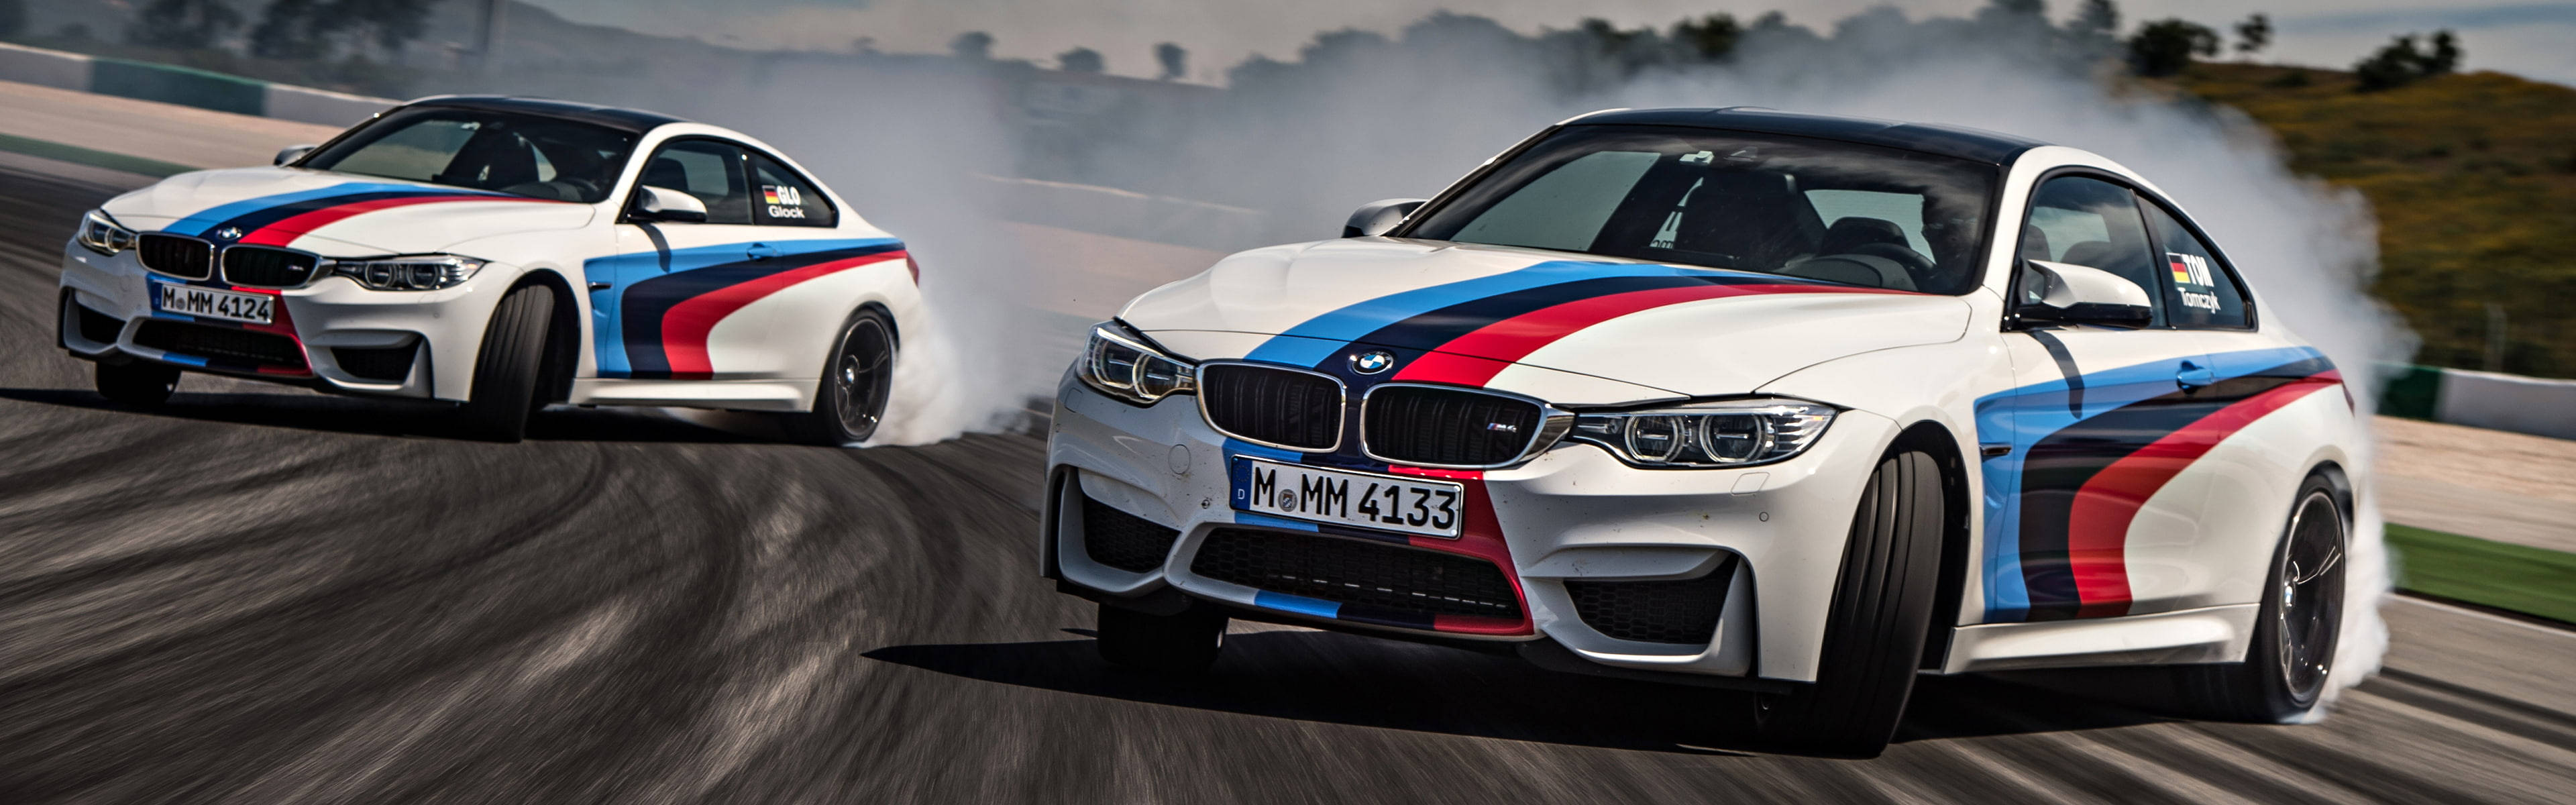 The Thrilling Ride Of A Bmw M4 Drift Car On The Track